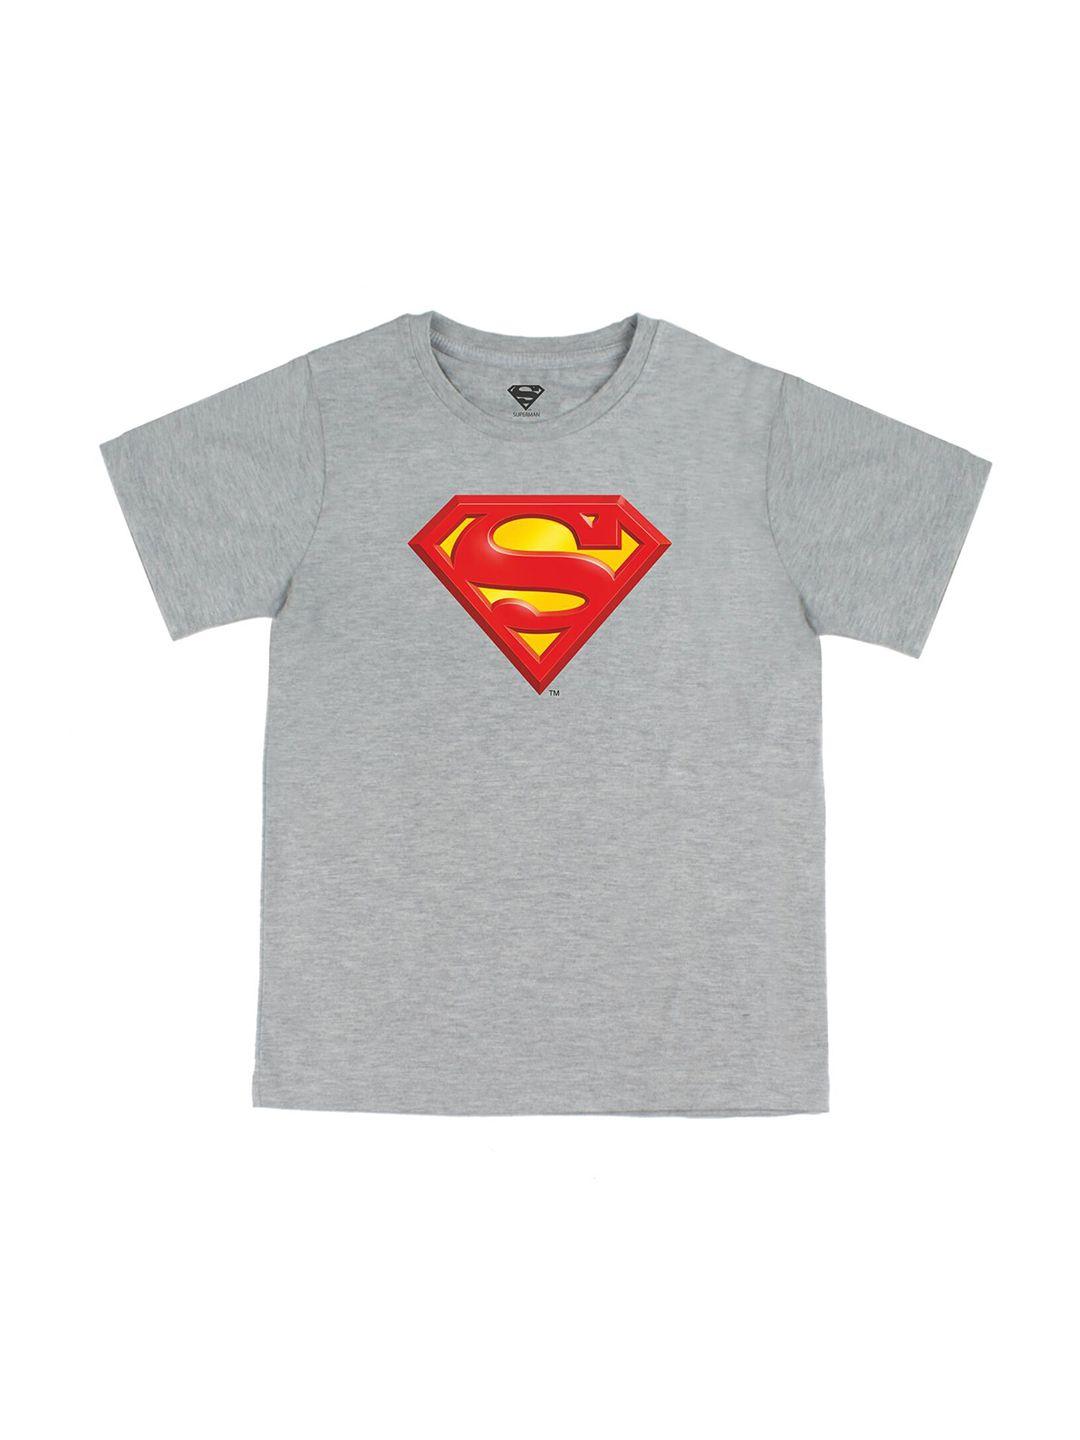 dc by wear your mind boys grey superman printed applique t-shirt